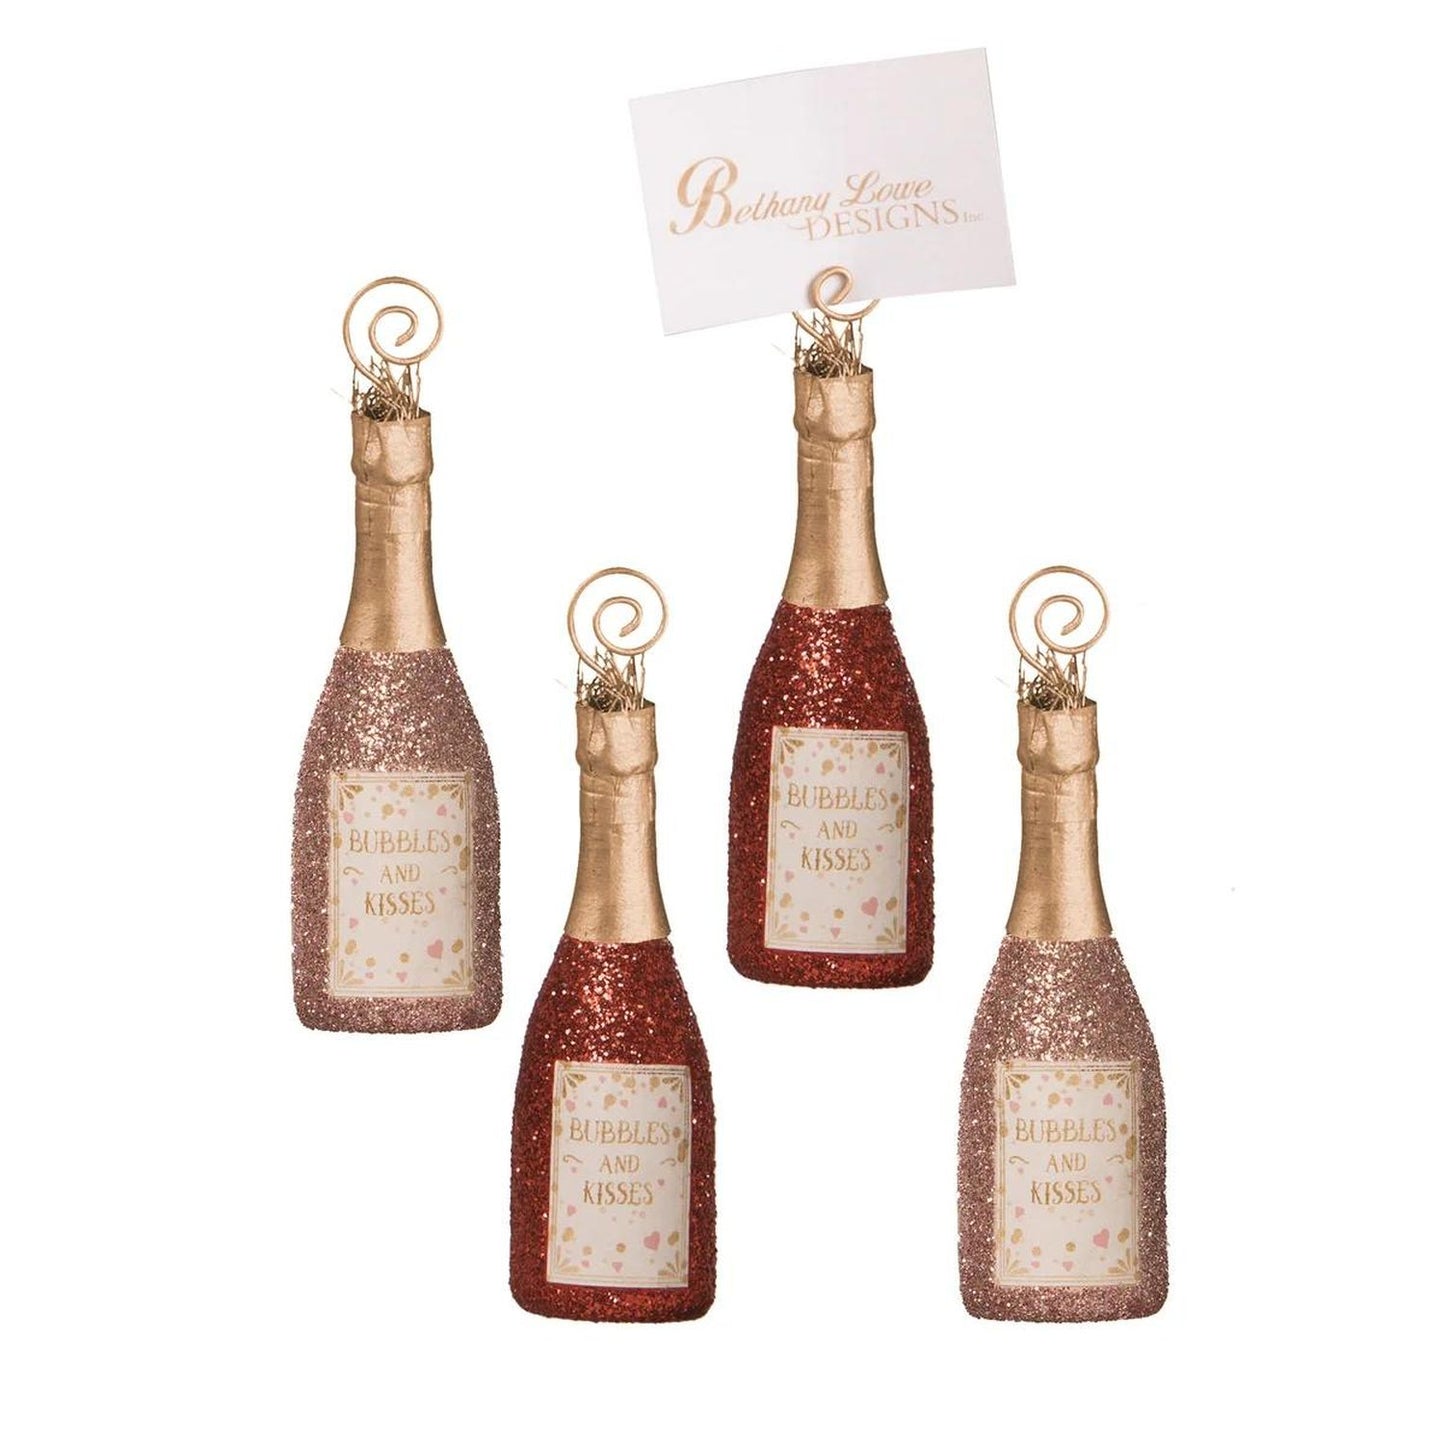 Bethany Lowe Bubbles And Kisses Champagne Ornament Place Card Holder, Set Of 4